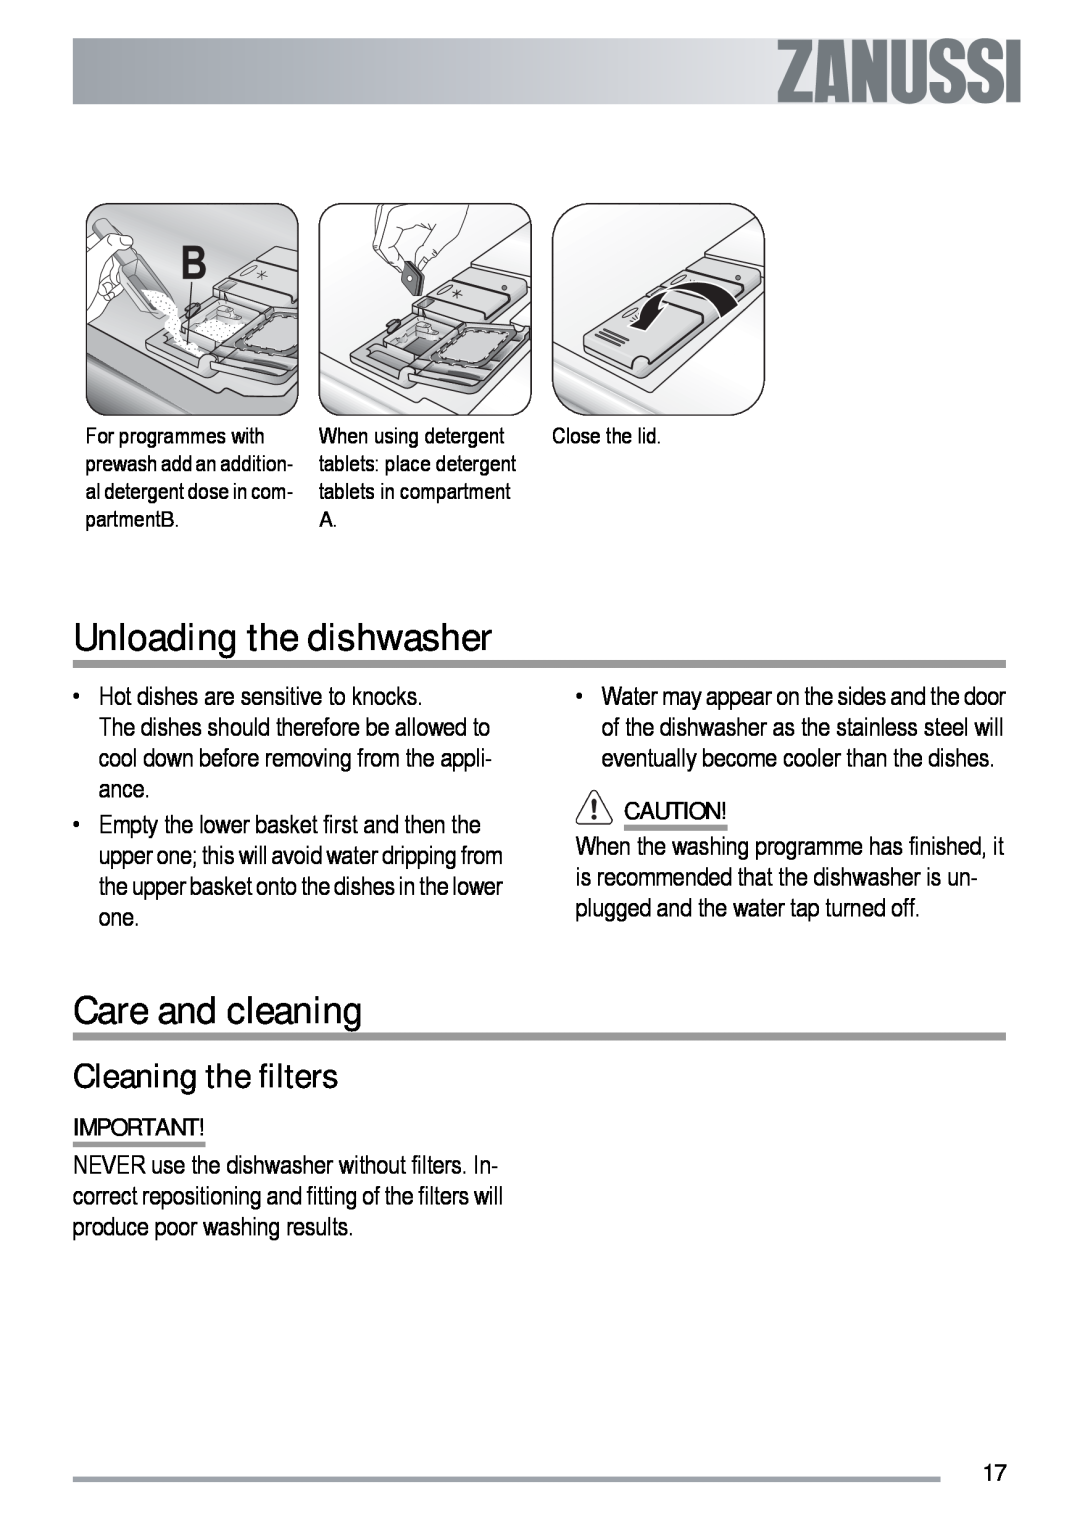 Zanussi ZDT 6454 user manual Unloading the dishwasher, Care and cleaning, Cleaning the filters 